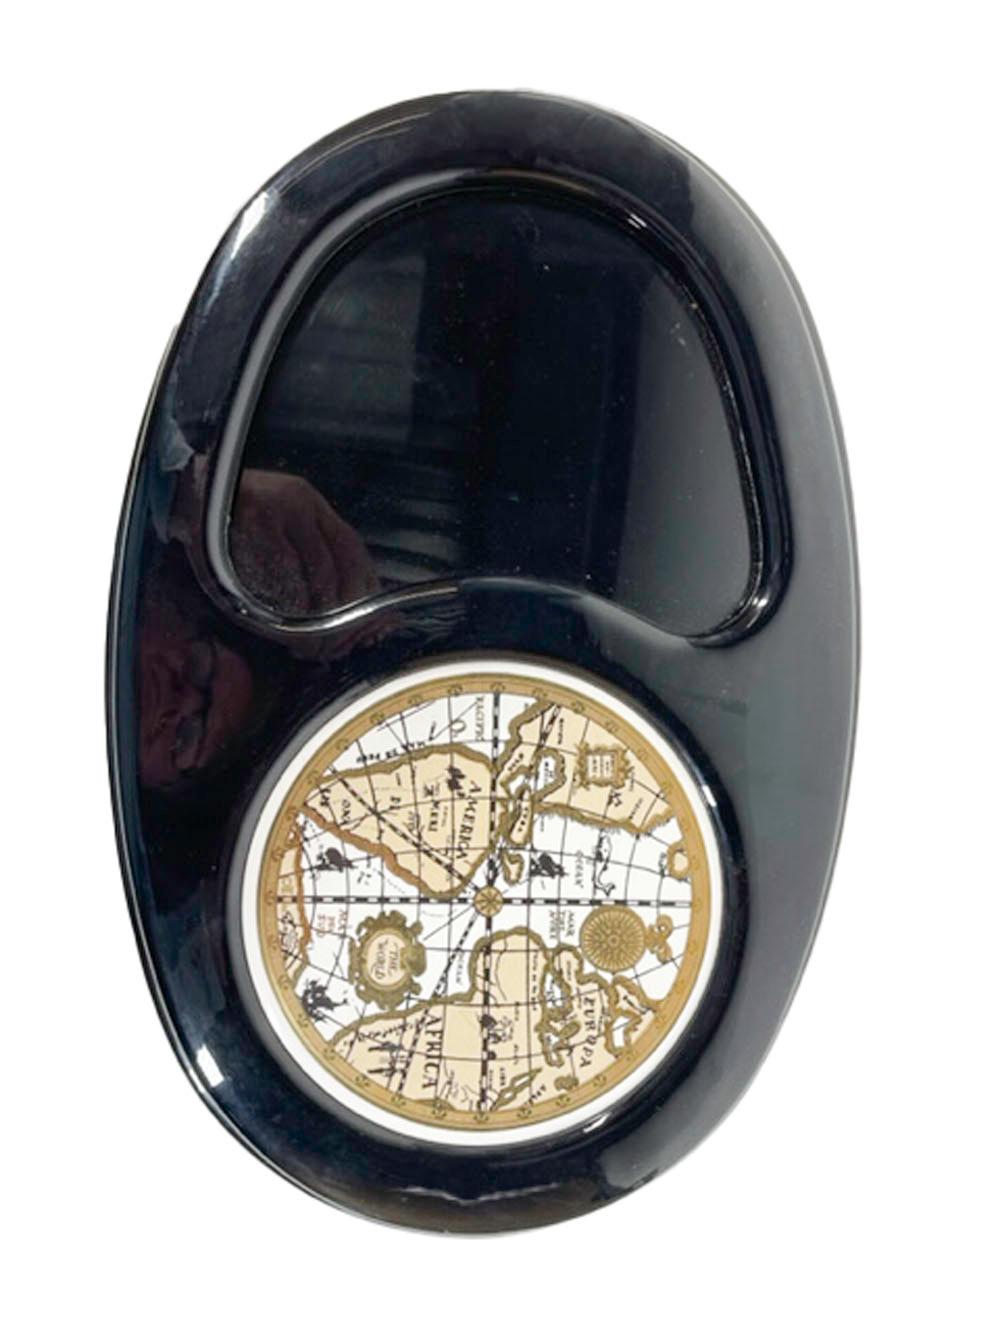 Mid-Century Modern oval cheese board clad in black vinyl with a ceramic tile inset cutting surface mad to compliment the Cera Glassware Old World Map barware pattern, decorated with an antique style world map.

 